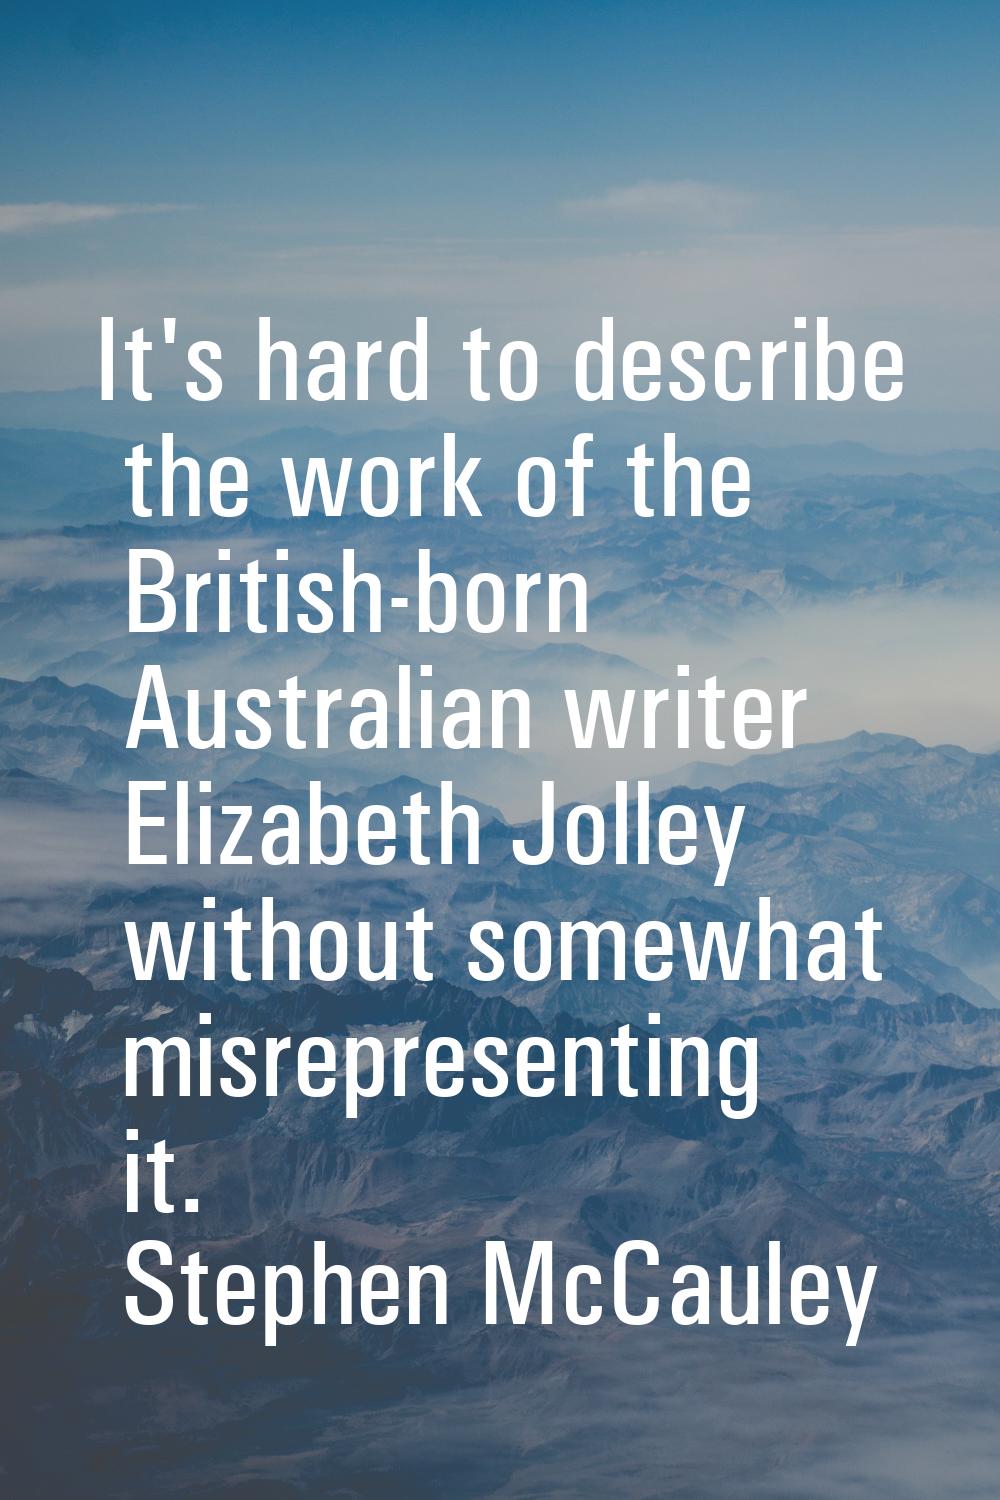 It's hard to describe the work of the British-born Australian writer Elizabeth Jolley without somew